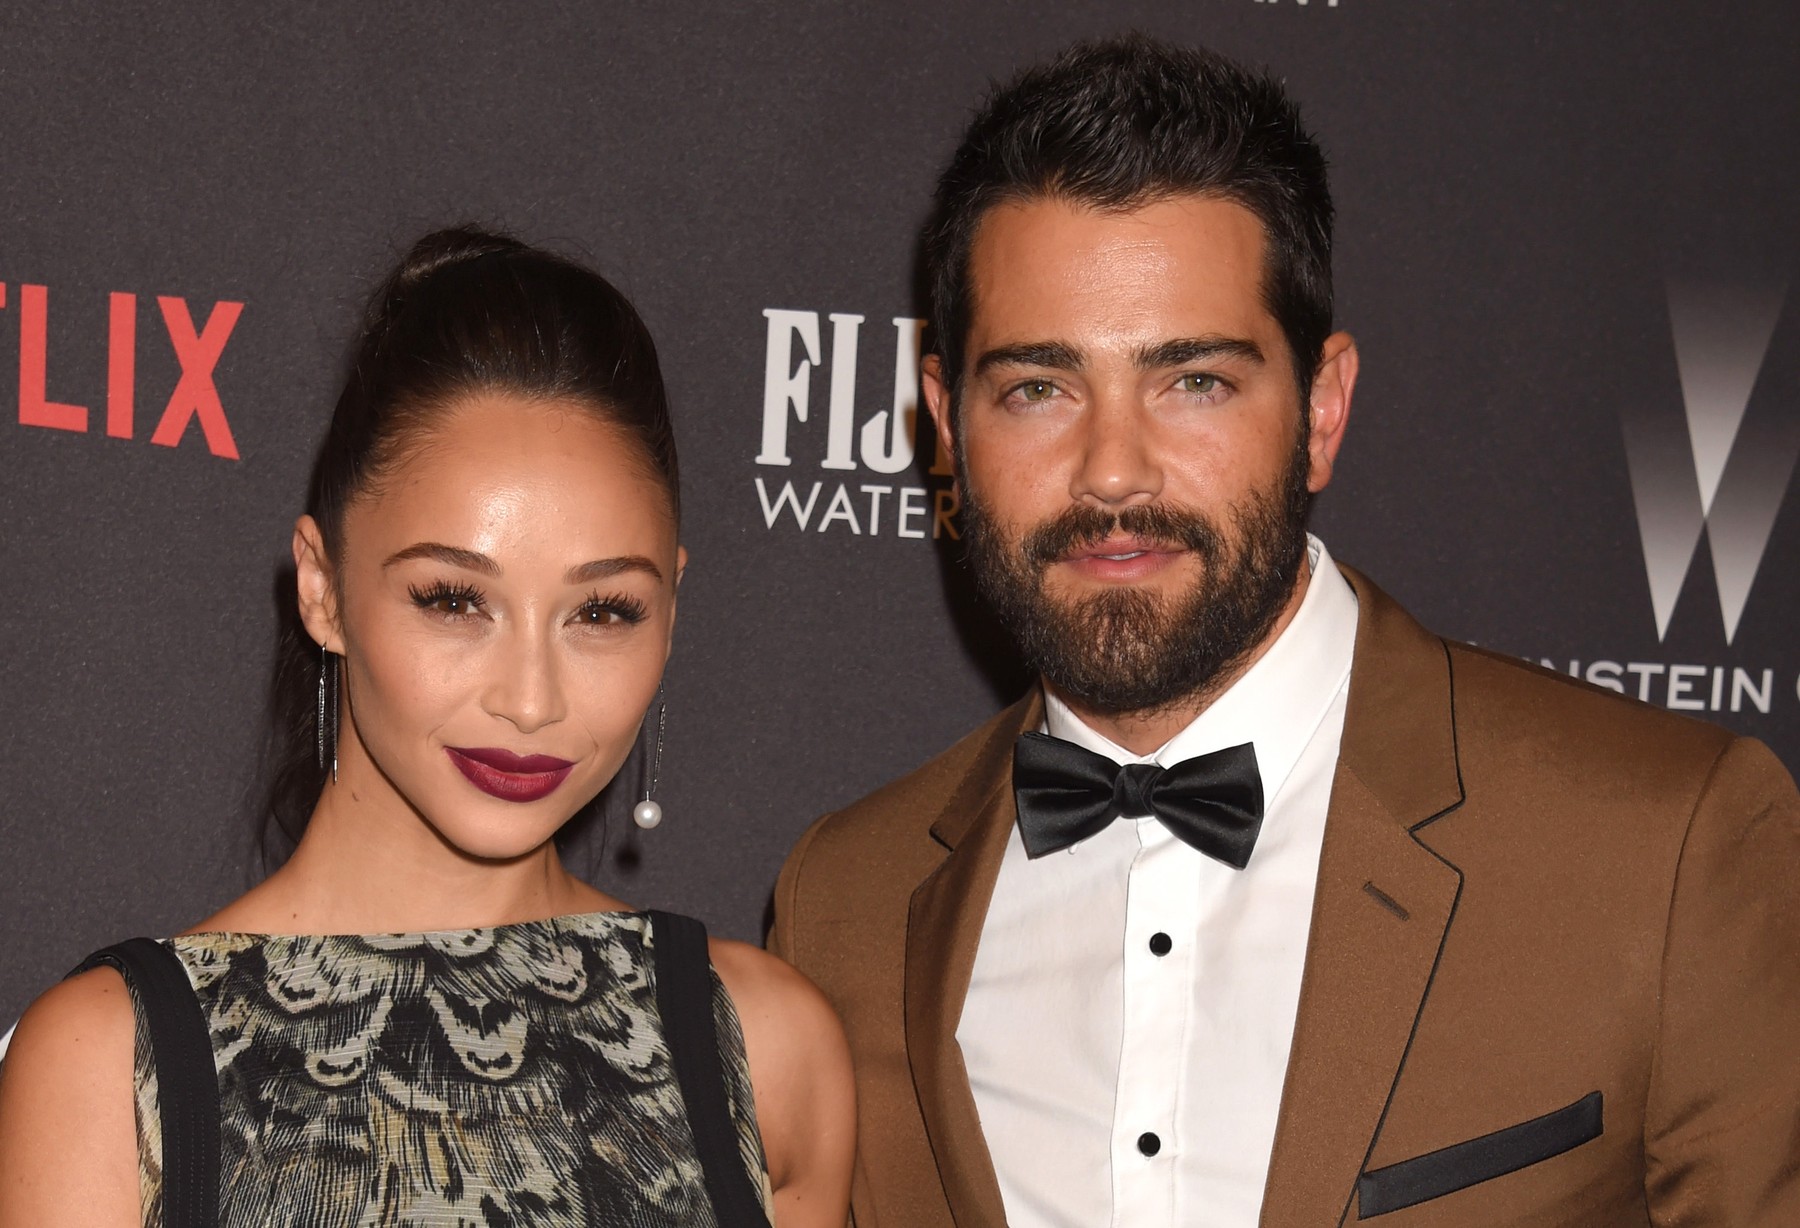 /Cara Santana; Jesse Metcalfe
2017 Weinstein Company And Netflix Golden Globes After Party - 08 Jan 2017
Actors Cara Santana (L) and Jesse Metcalfe attend The Weinstein Company and Netflix Golden Globe Party, presented with FIJI Water, Grey Goose Vodka, Lindt Chocolate, and Moroccan Oil at The Beverly Hilton Hotel on January 8, 2017 in Los Angeles, CaliforniaPhoto John Milne/SilverHub 0208 004 5359
Sales@silverhubmedia.com, Image: 310406034, License: Rights-managed, Restrictions: , Model Release: no, Credit line: Milne/SilverHub / Shutterstock Editorial / Profimedia